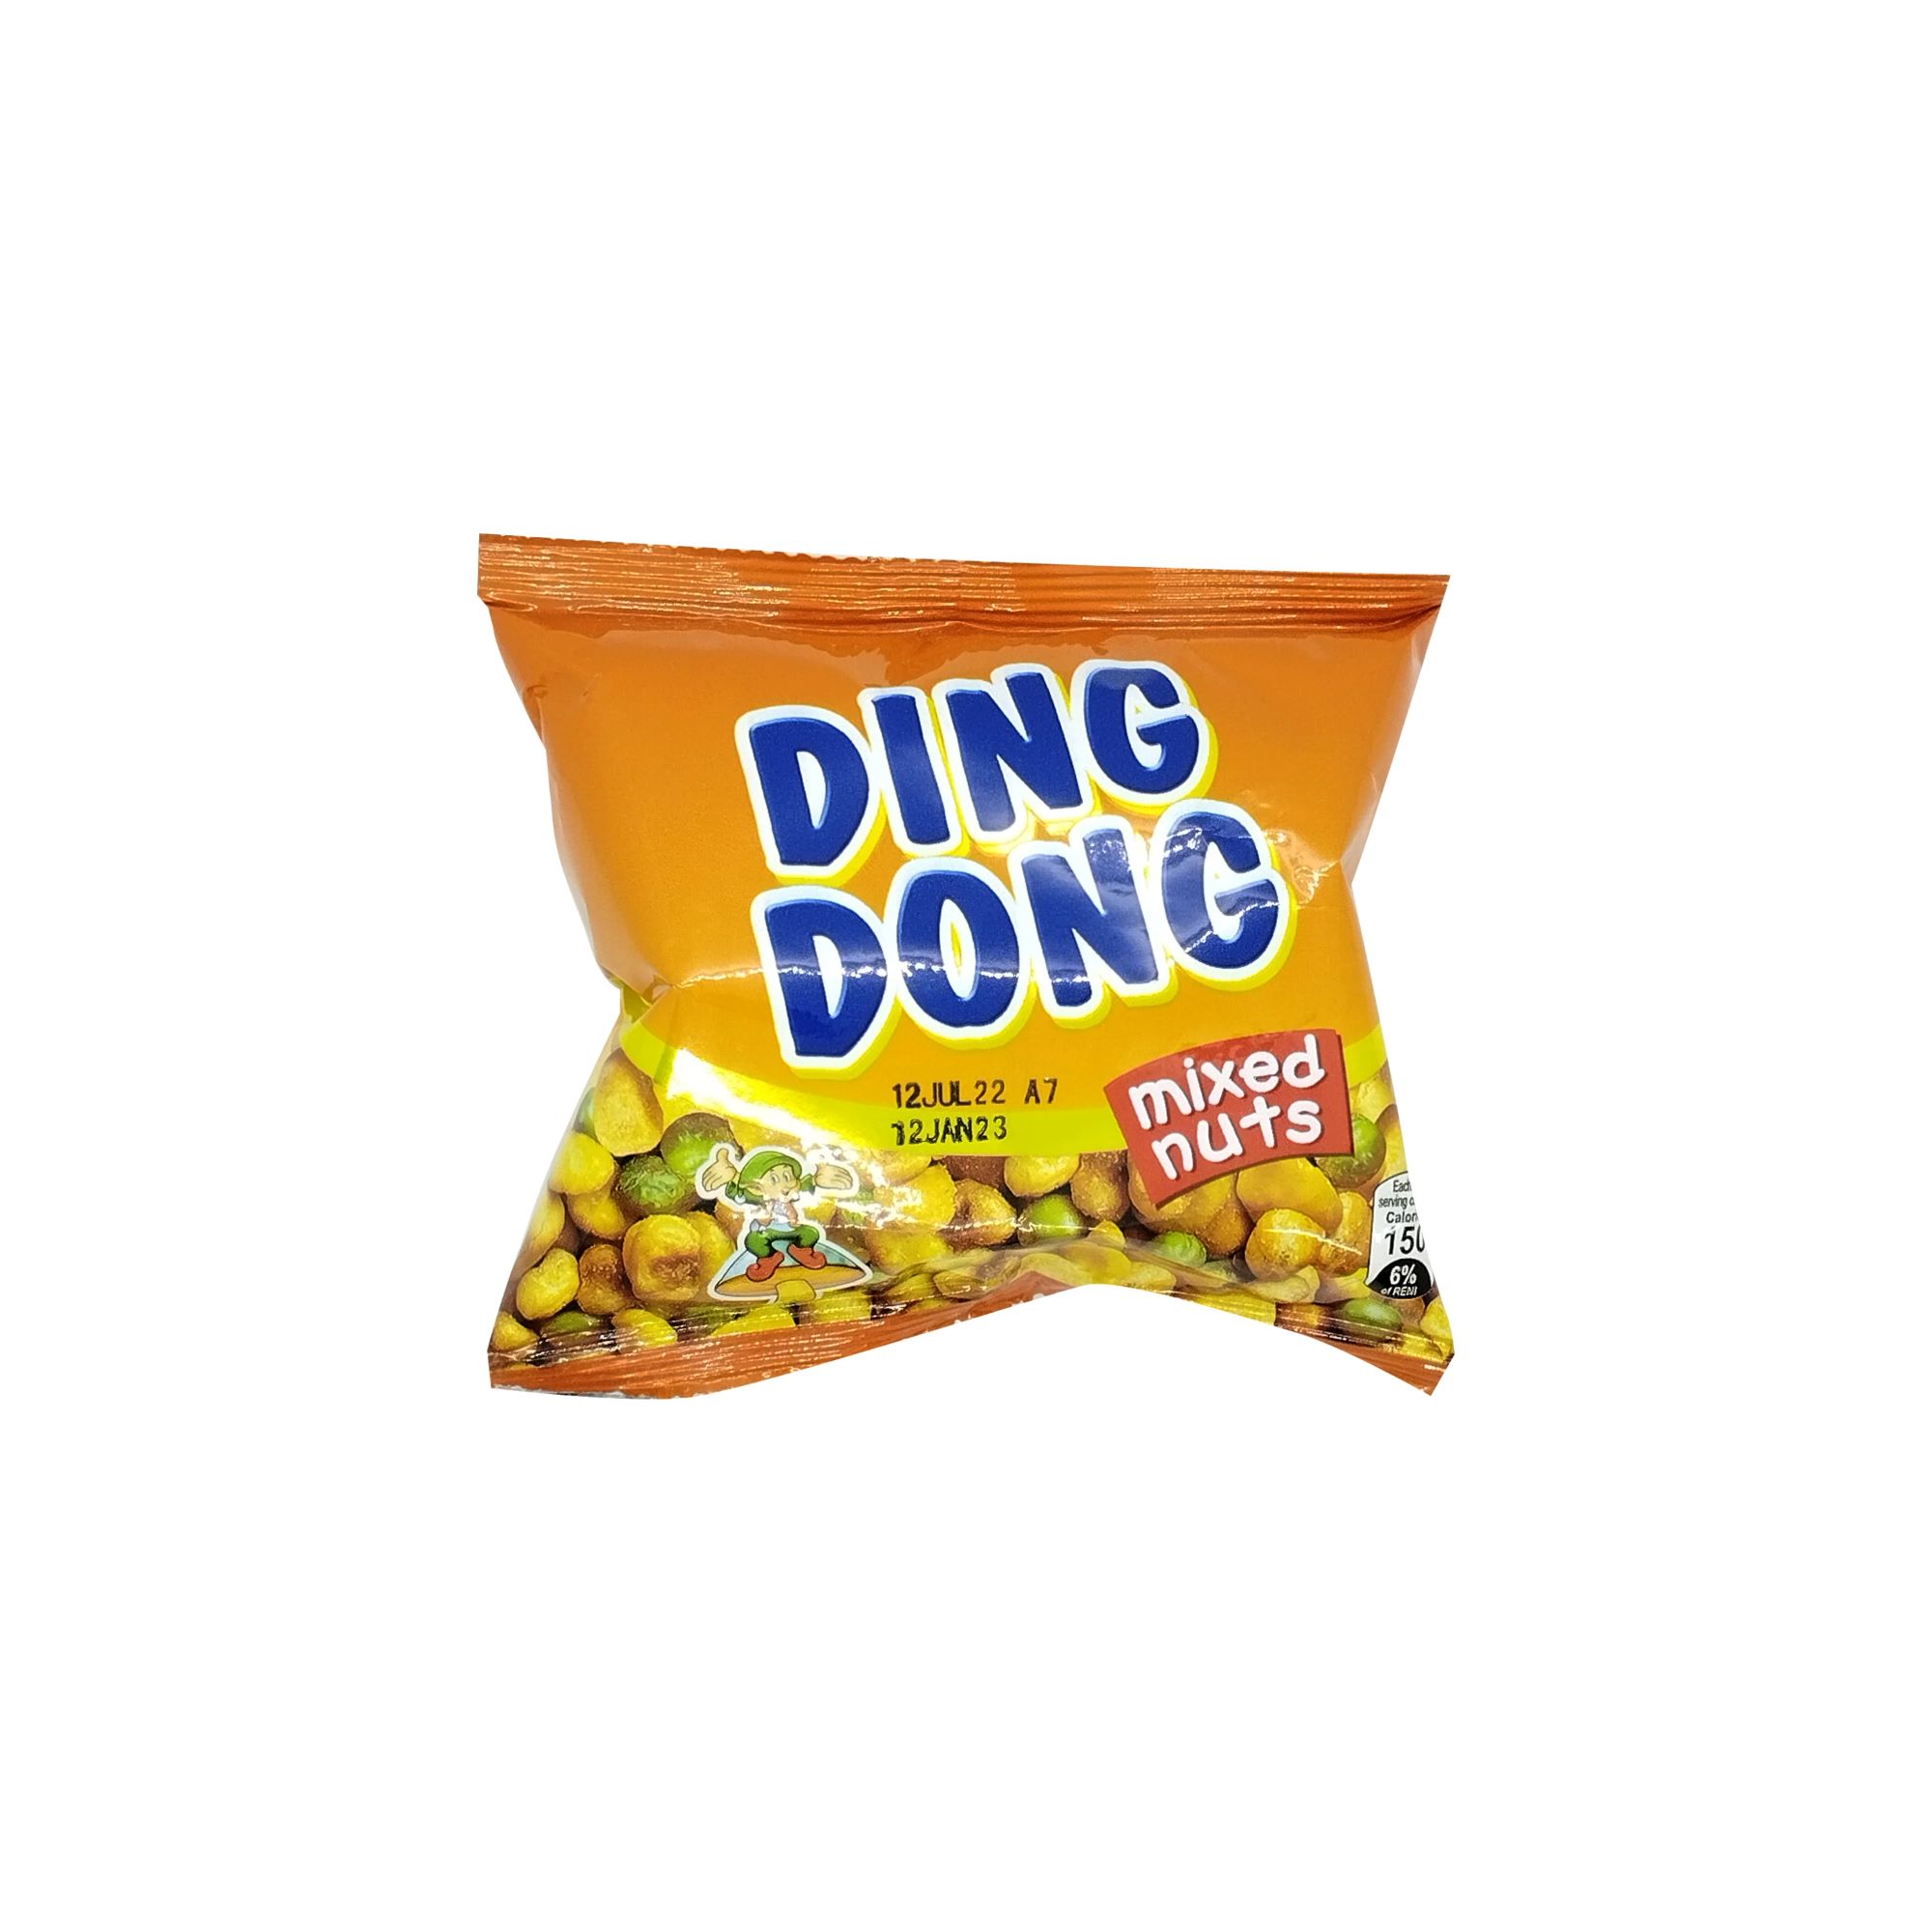 20-ding-dong-nutrition-facts